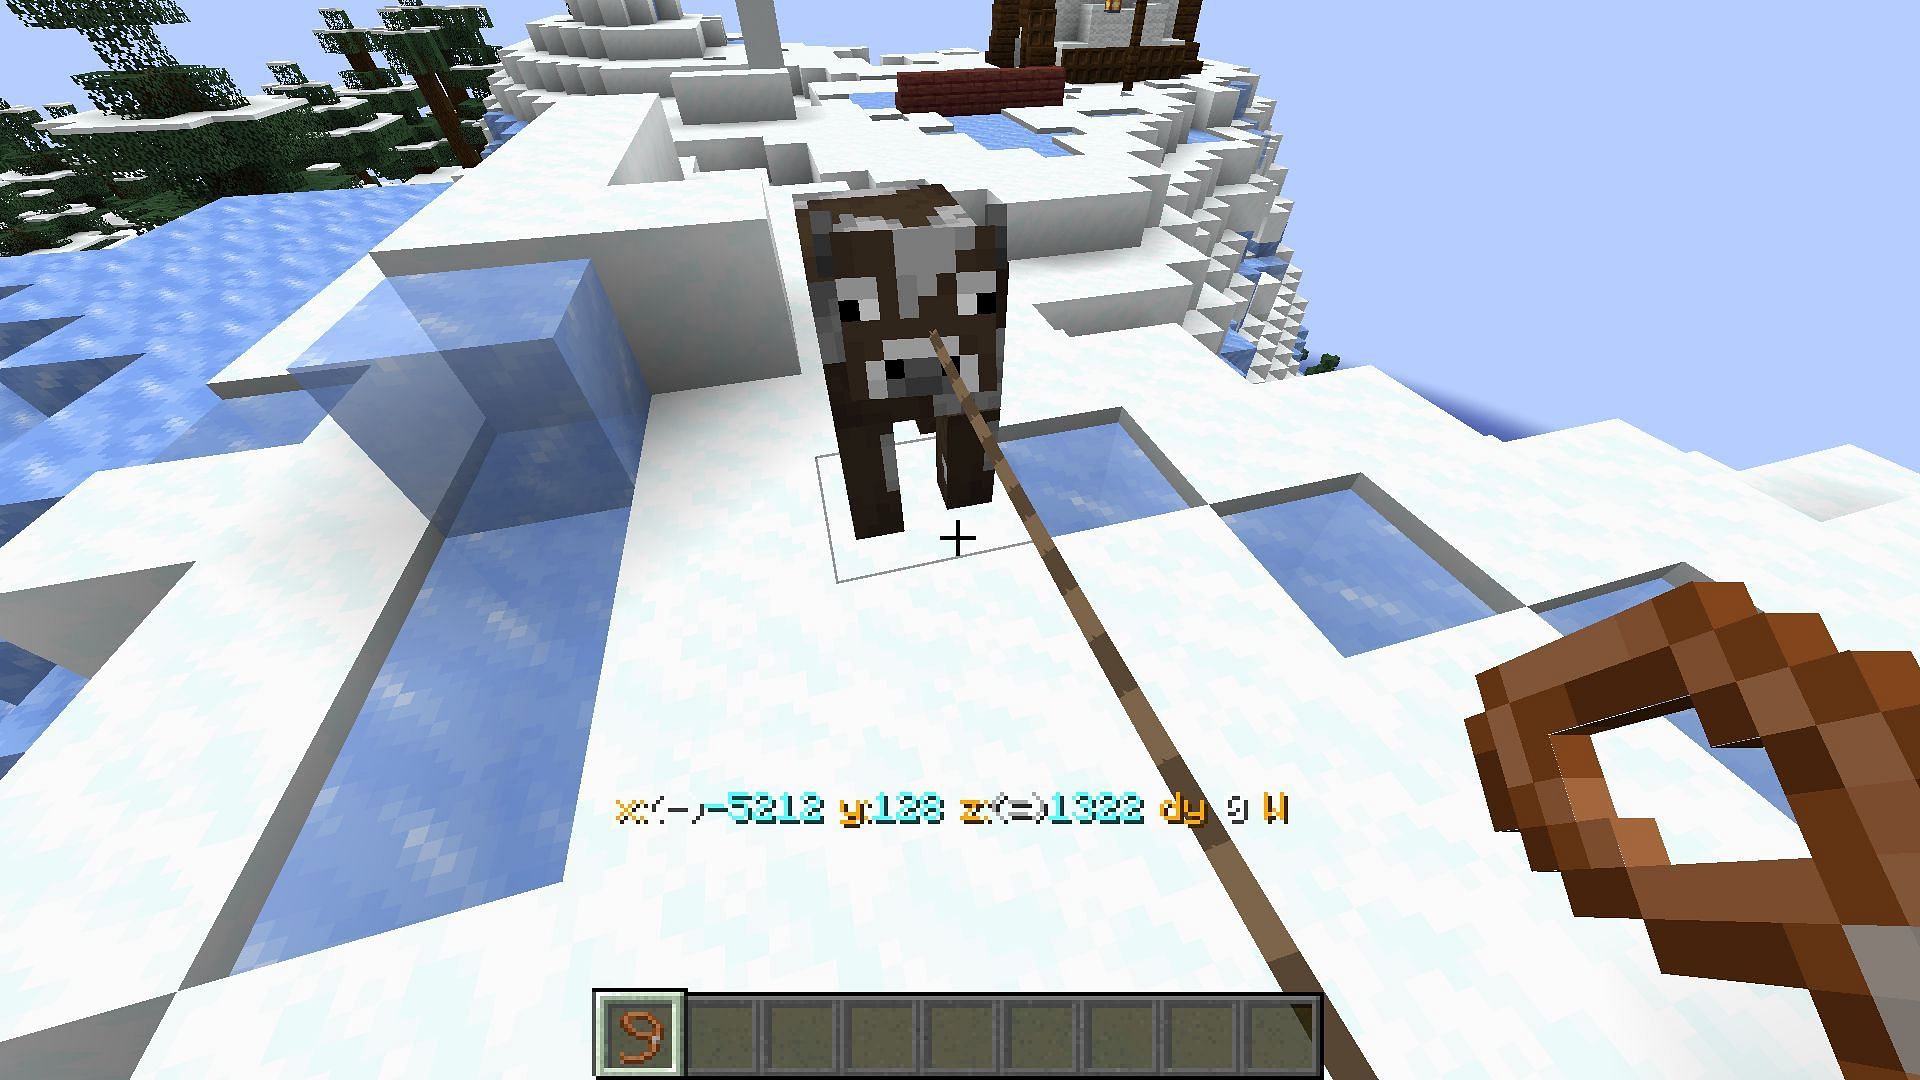 Lead can be used to leash mobs and move them in Minecraft (Image via Mojang)